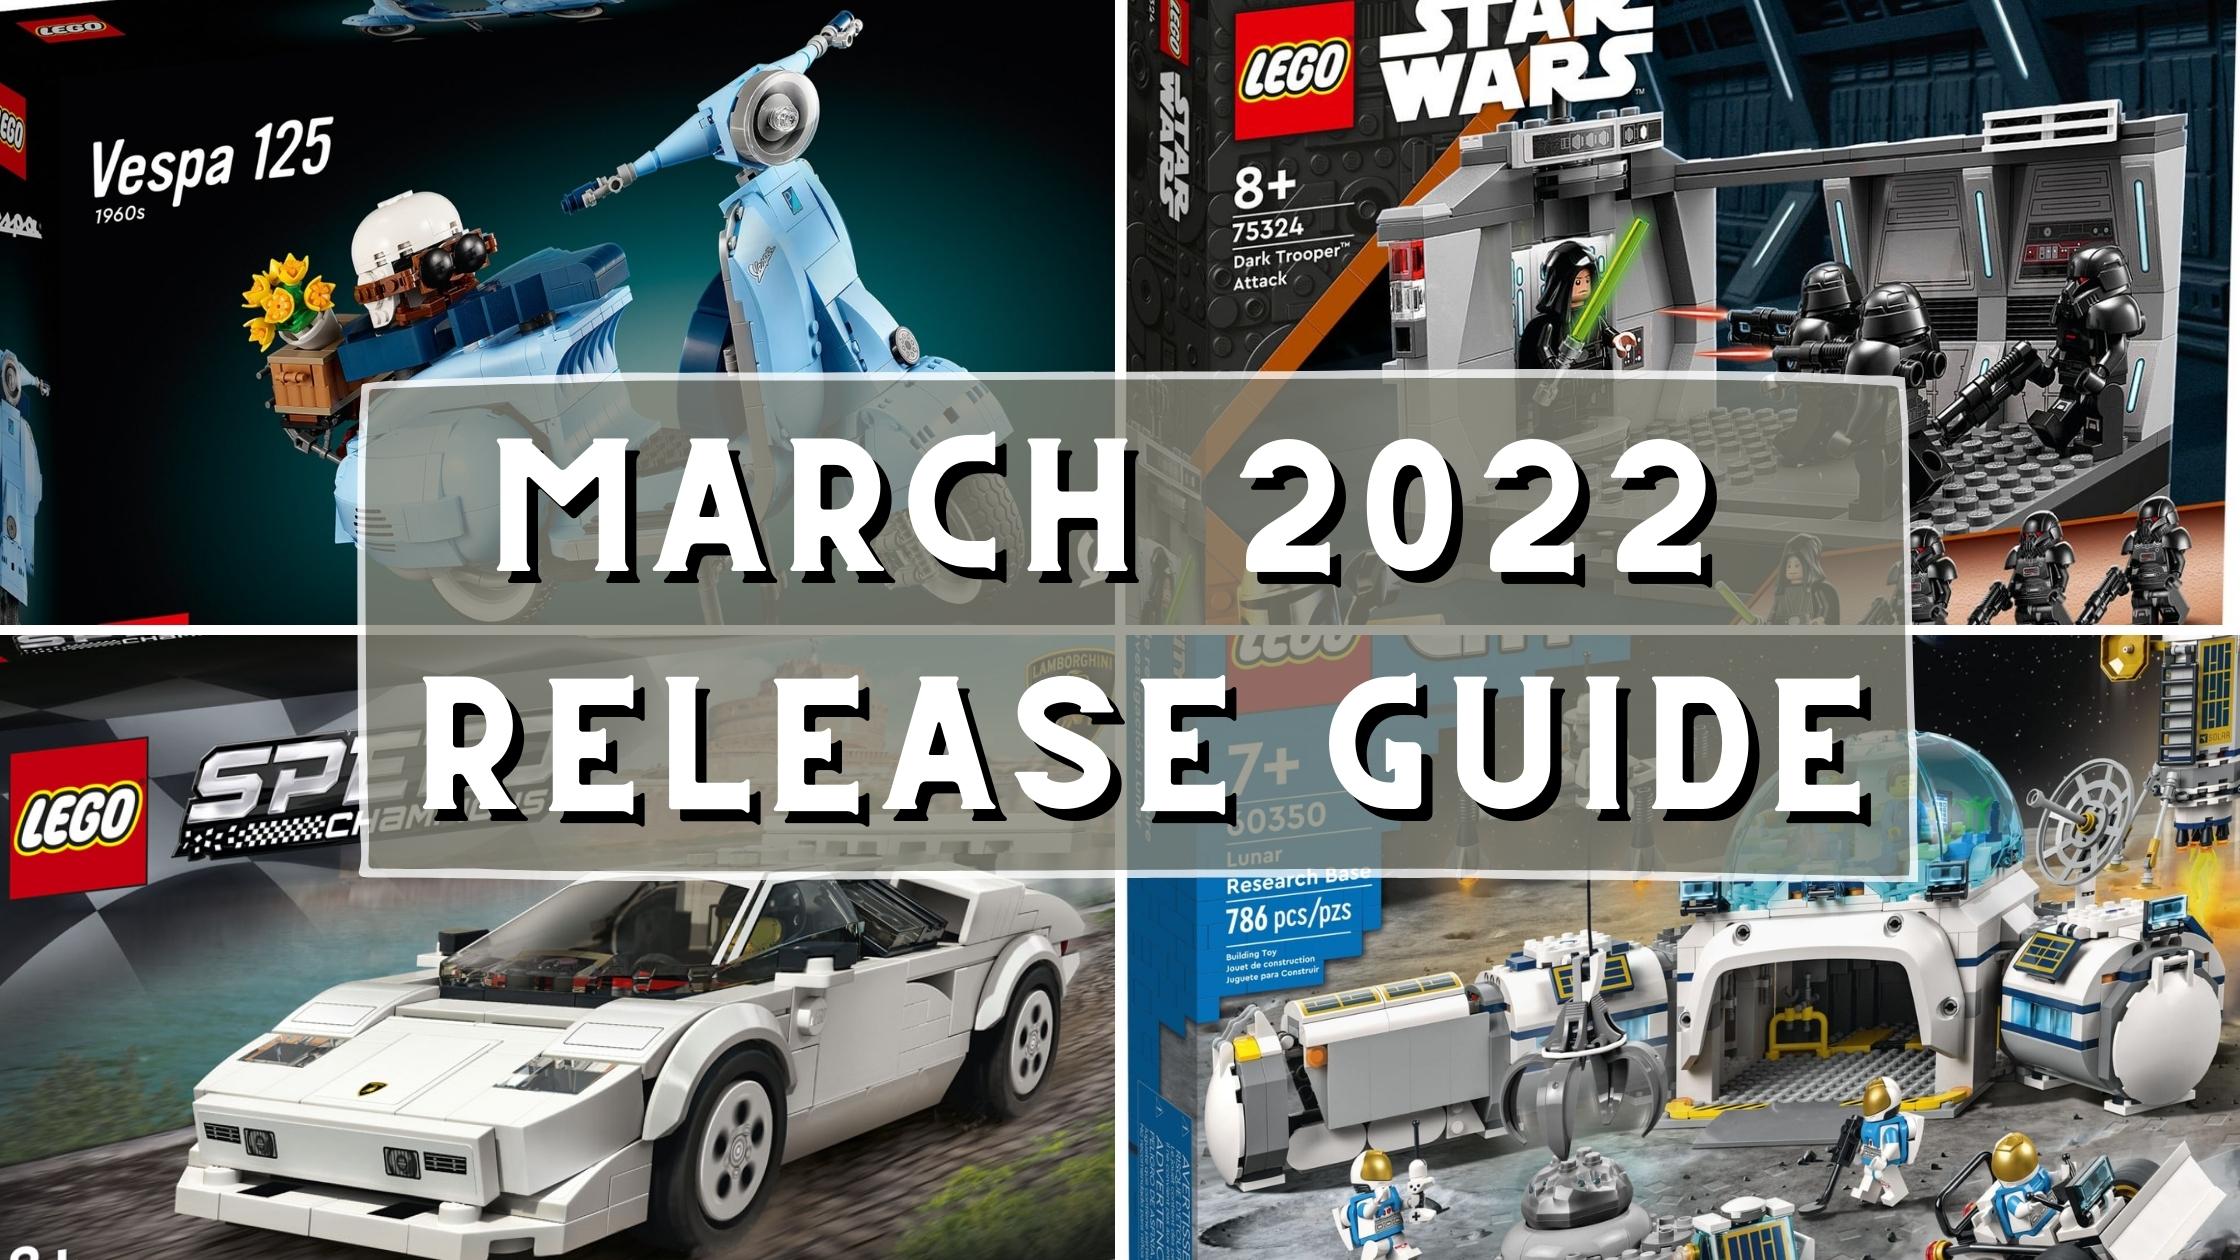 Lego March 2022 Calendar Buying Guide: All The New Lego Sets Releasing On 1 March 2022 - Jay's Brick  Blog